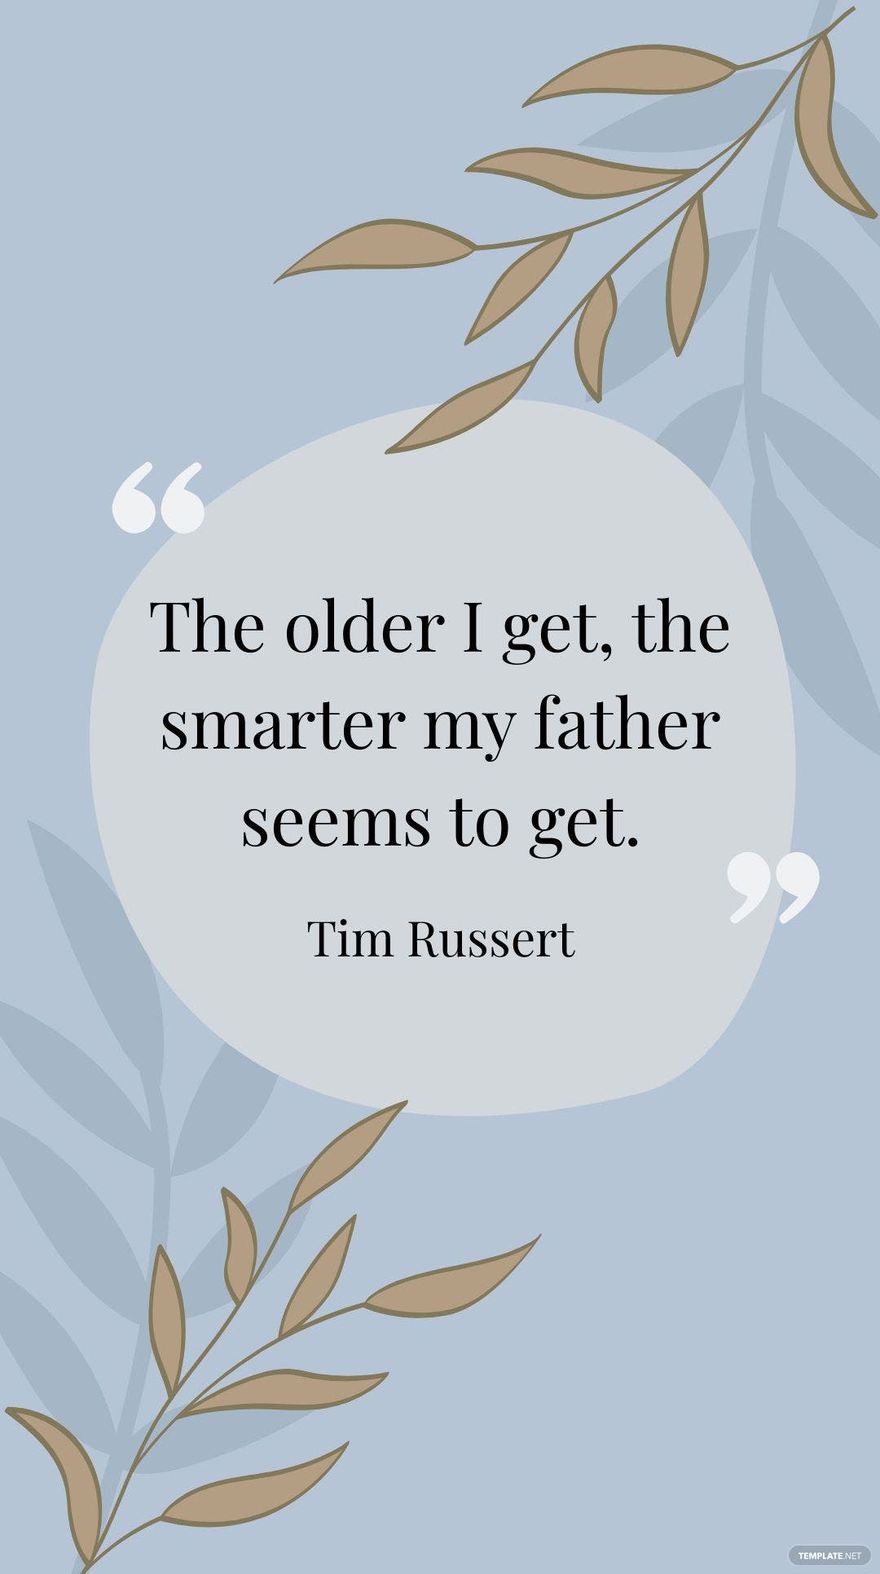 Tim Russert - “The older I get, the smarter my father seems to get.”